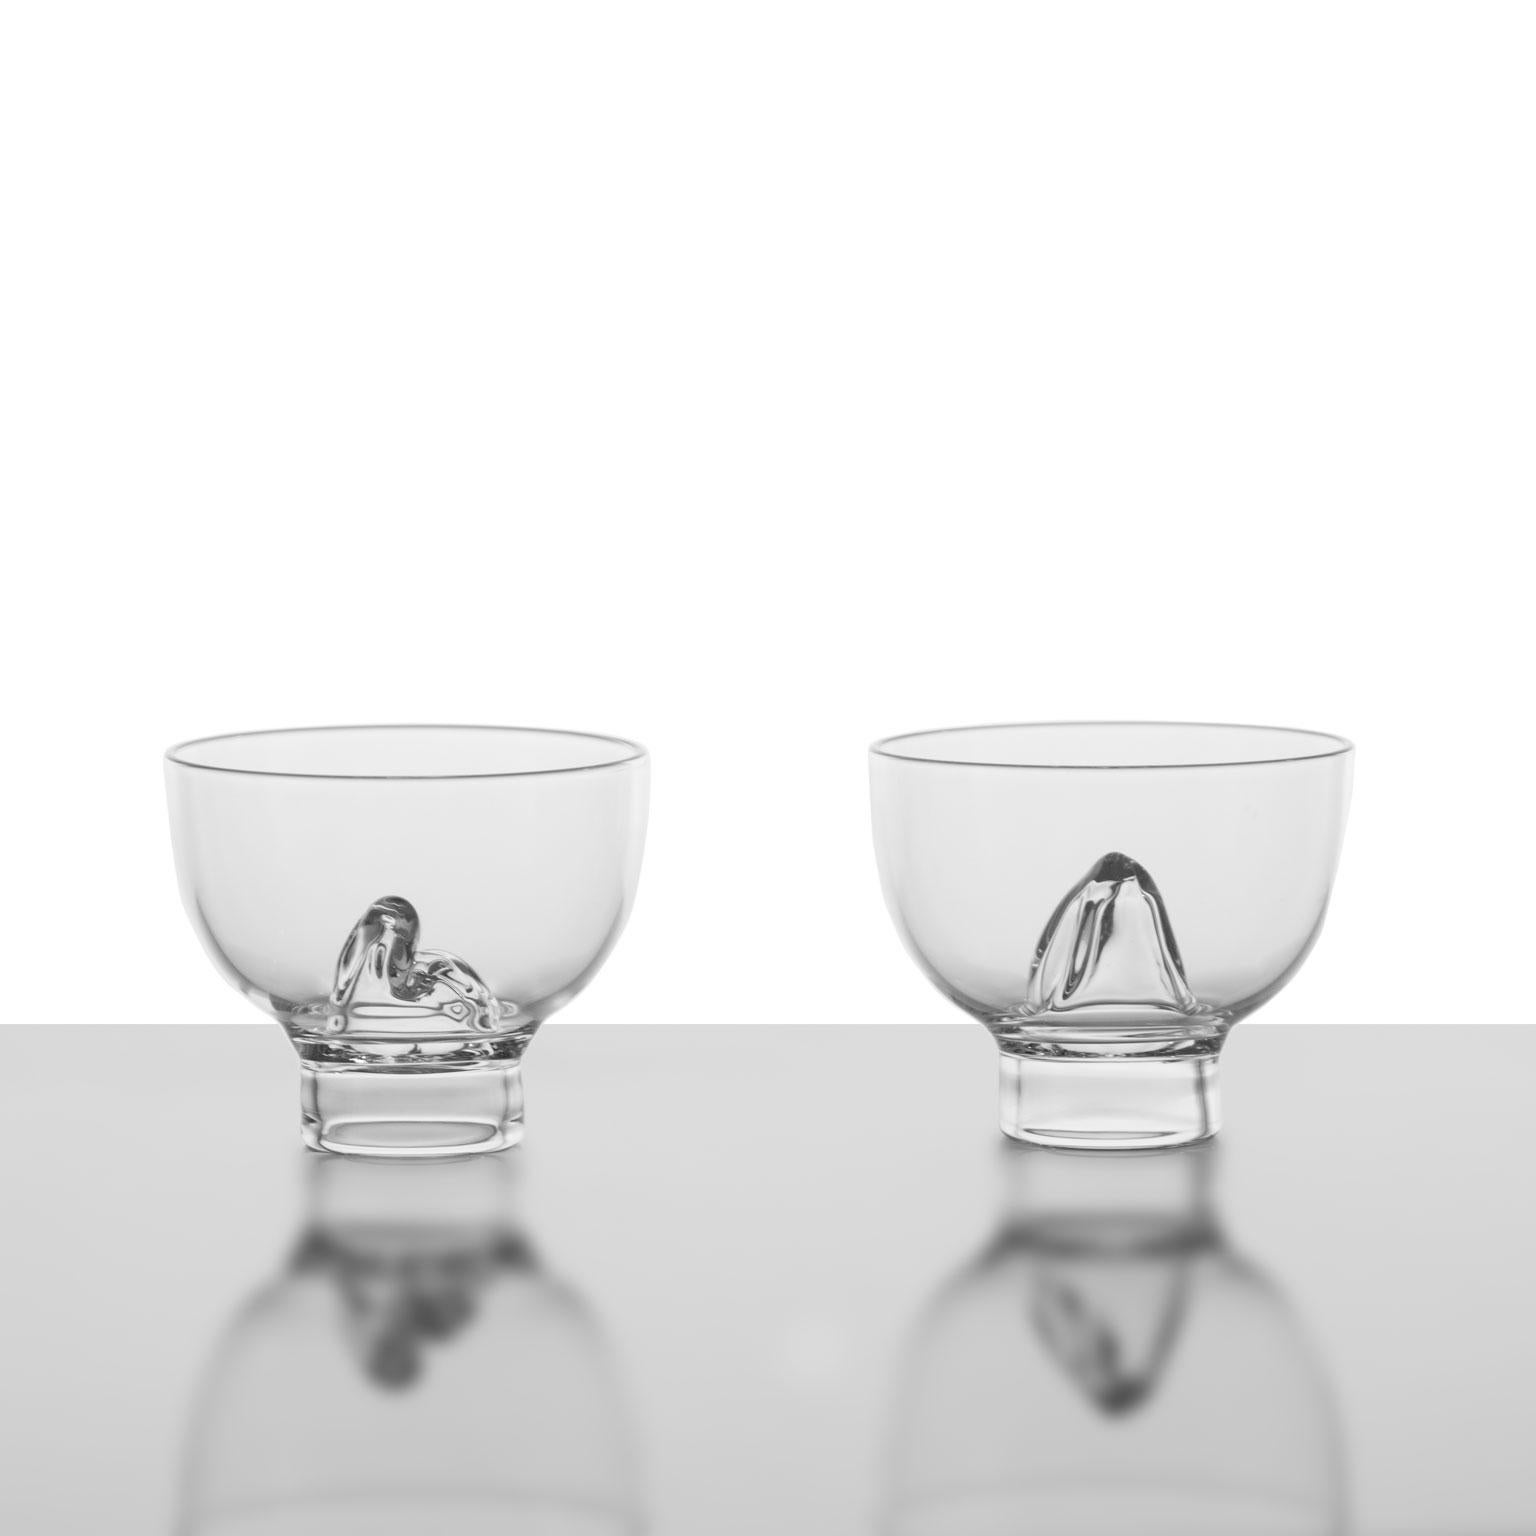 Suiseki Tea Cups
A pair of Hand-Blown Glass Tea Cups by Simone Crestani

Suiseki Tea Cups are two of the pieces from the Nature Collection.

 